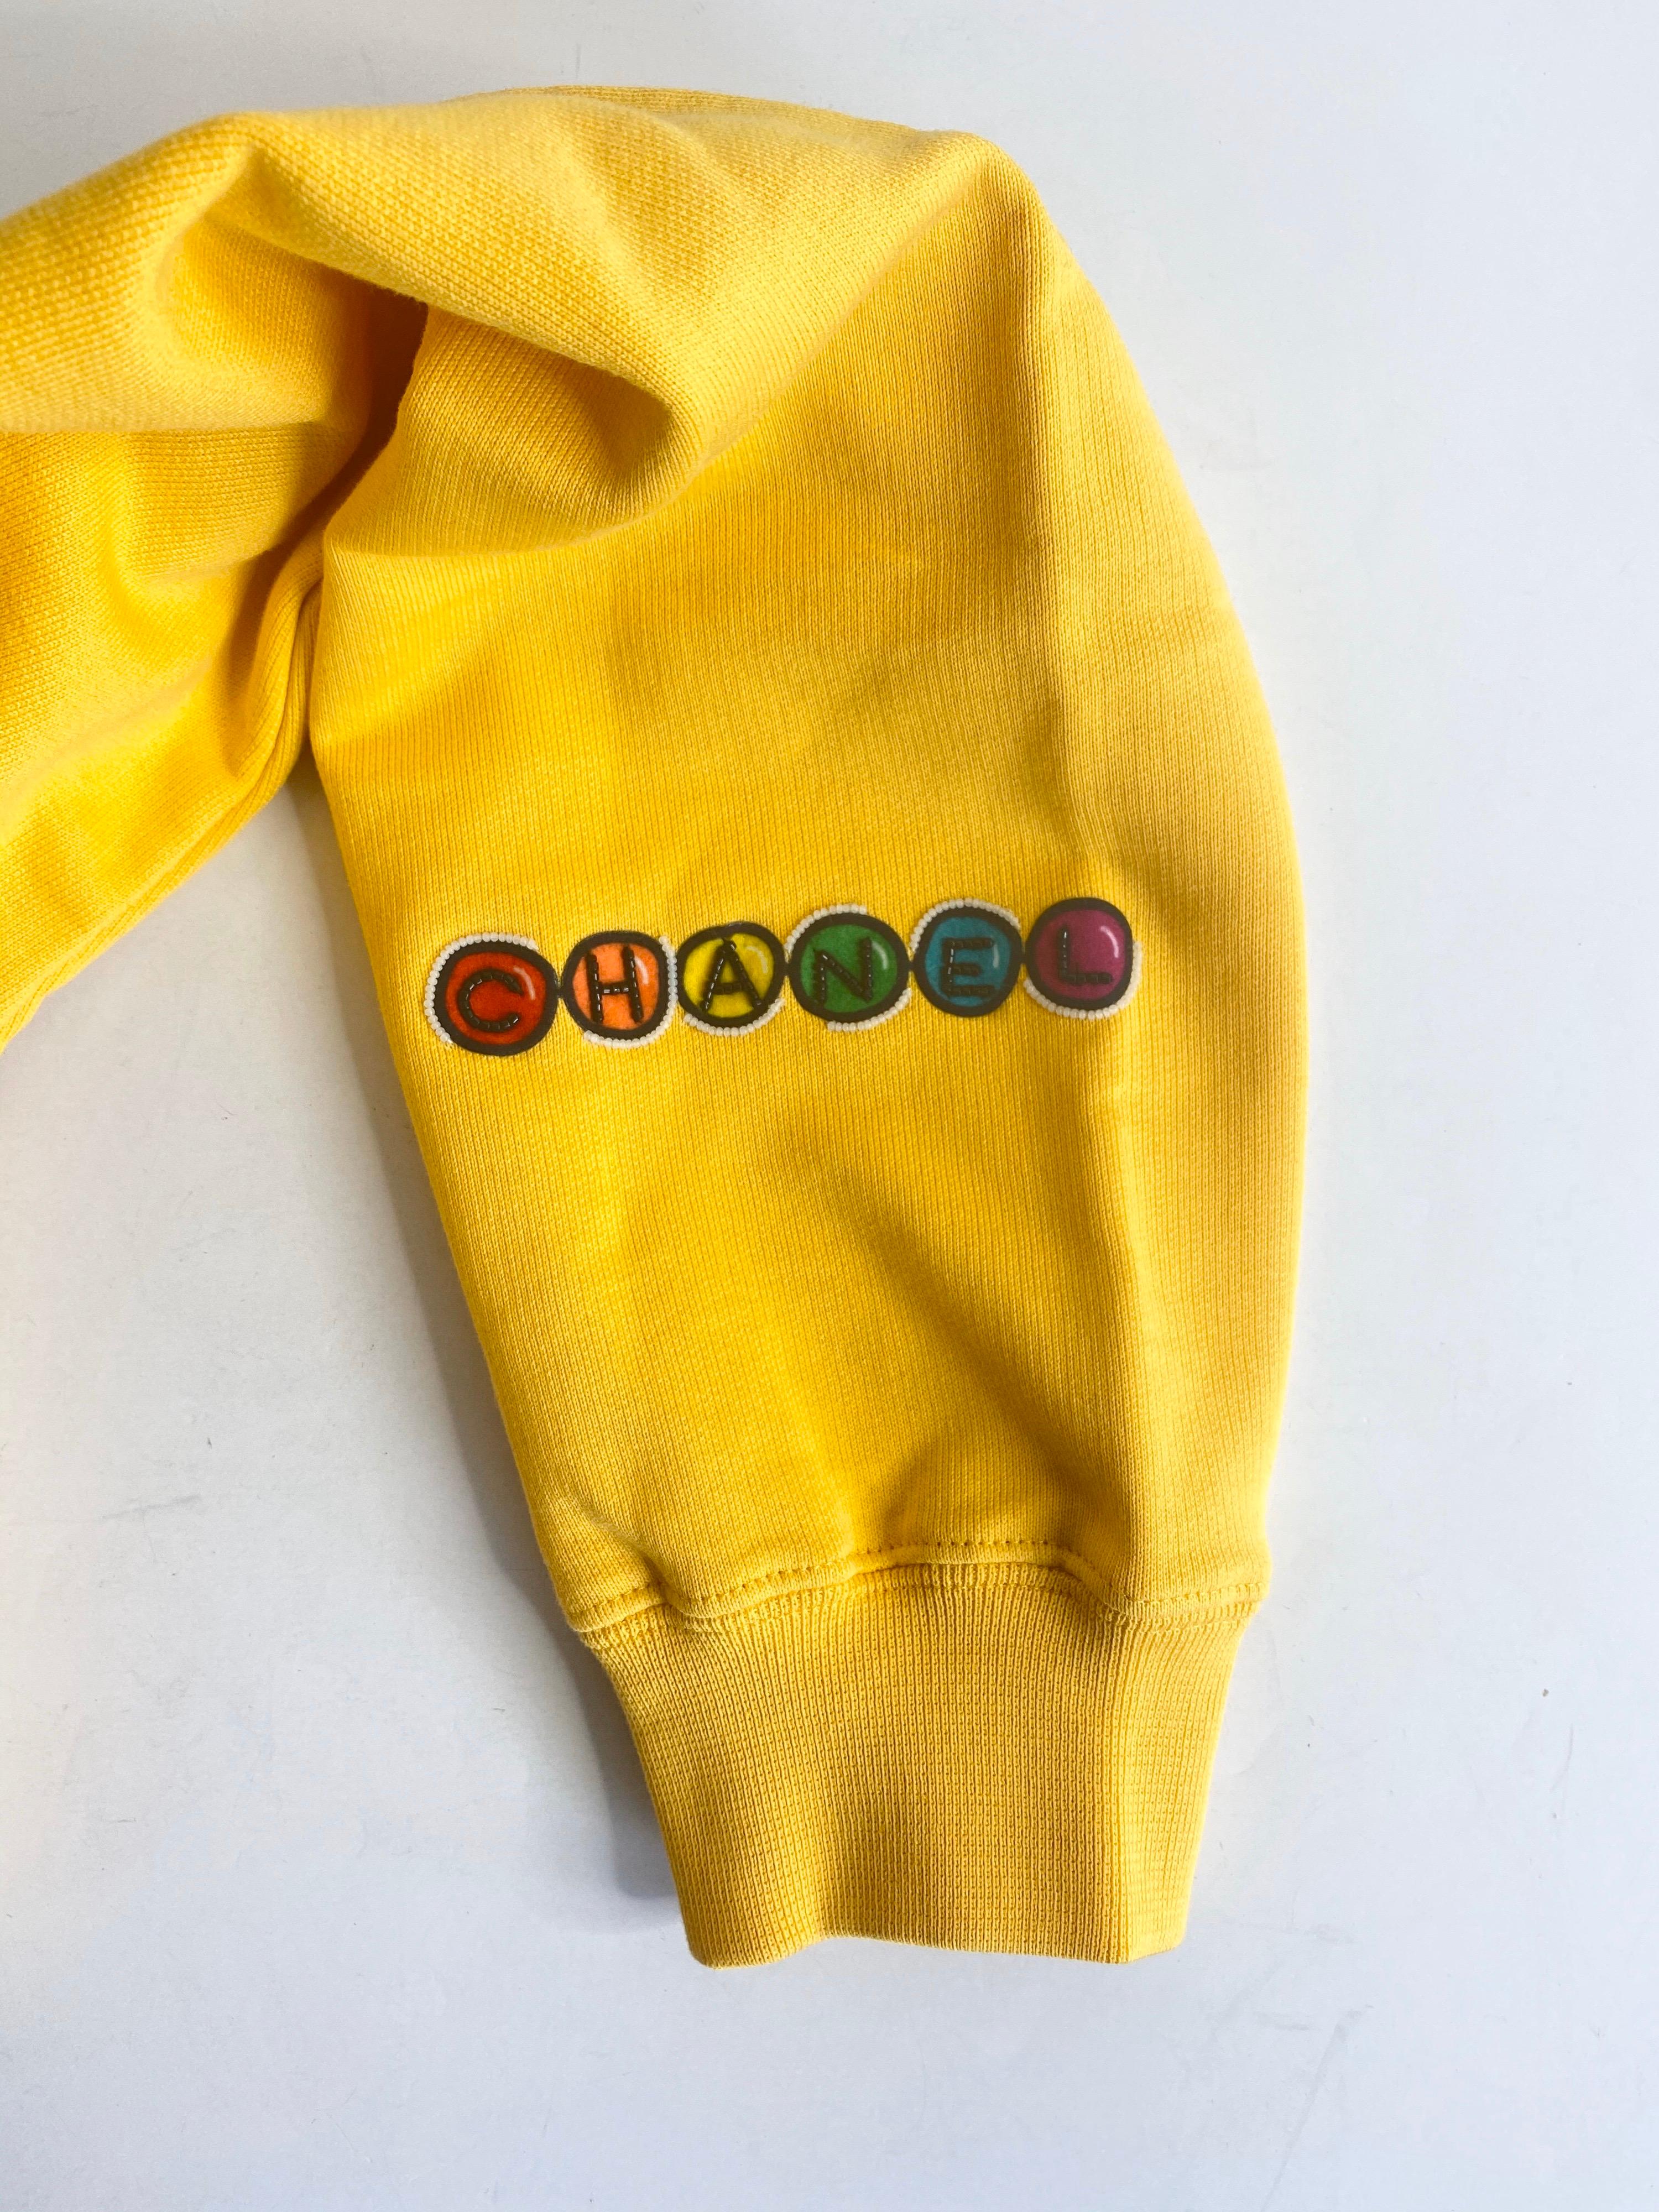 Chanel x Pharrell 2019 Chanel Appliqué Sunflower Yellow Hoodie  For Sale 9